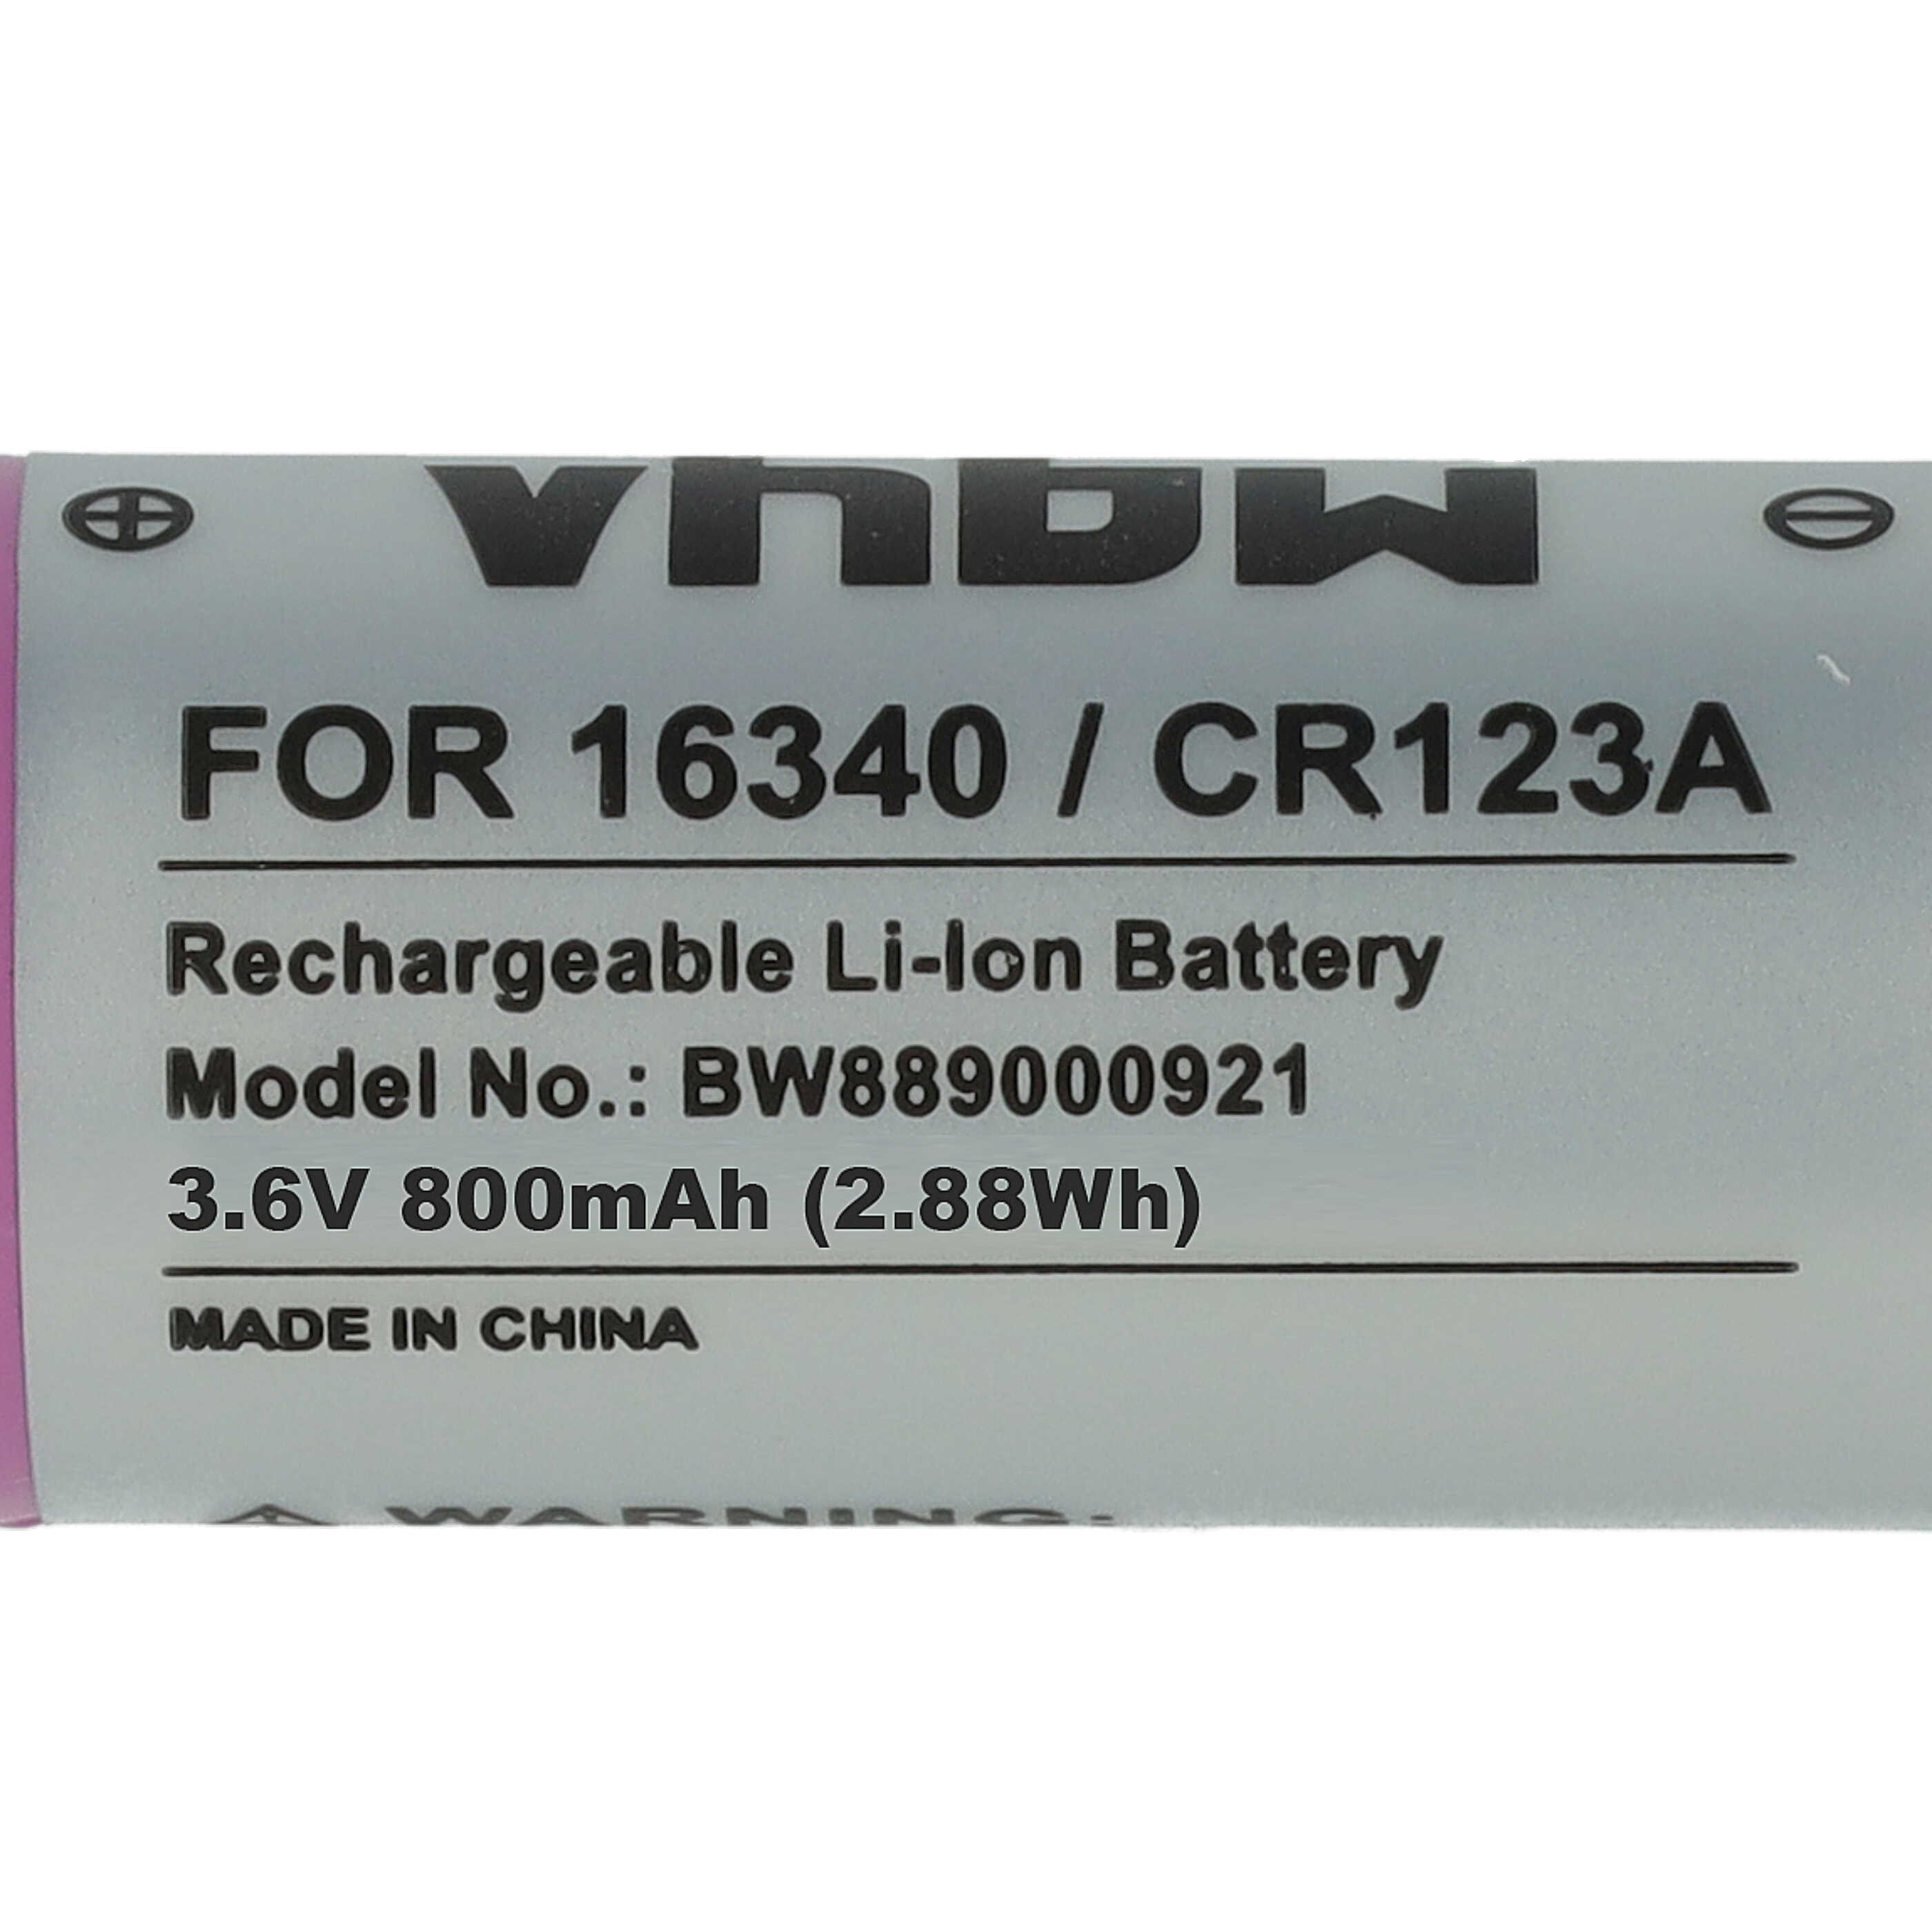 Universal Battery (2 Units) Replacement for 16340, CR123R, CR17335, CR17345, CR123A - 800mAh 3.6V Li-Ion